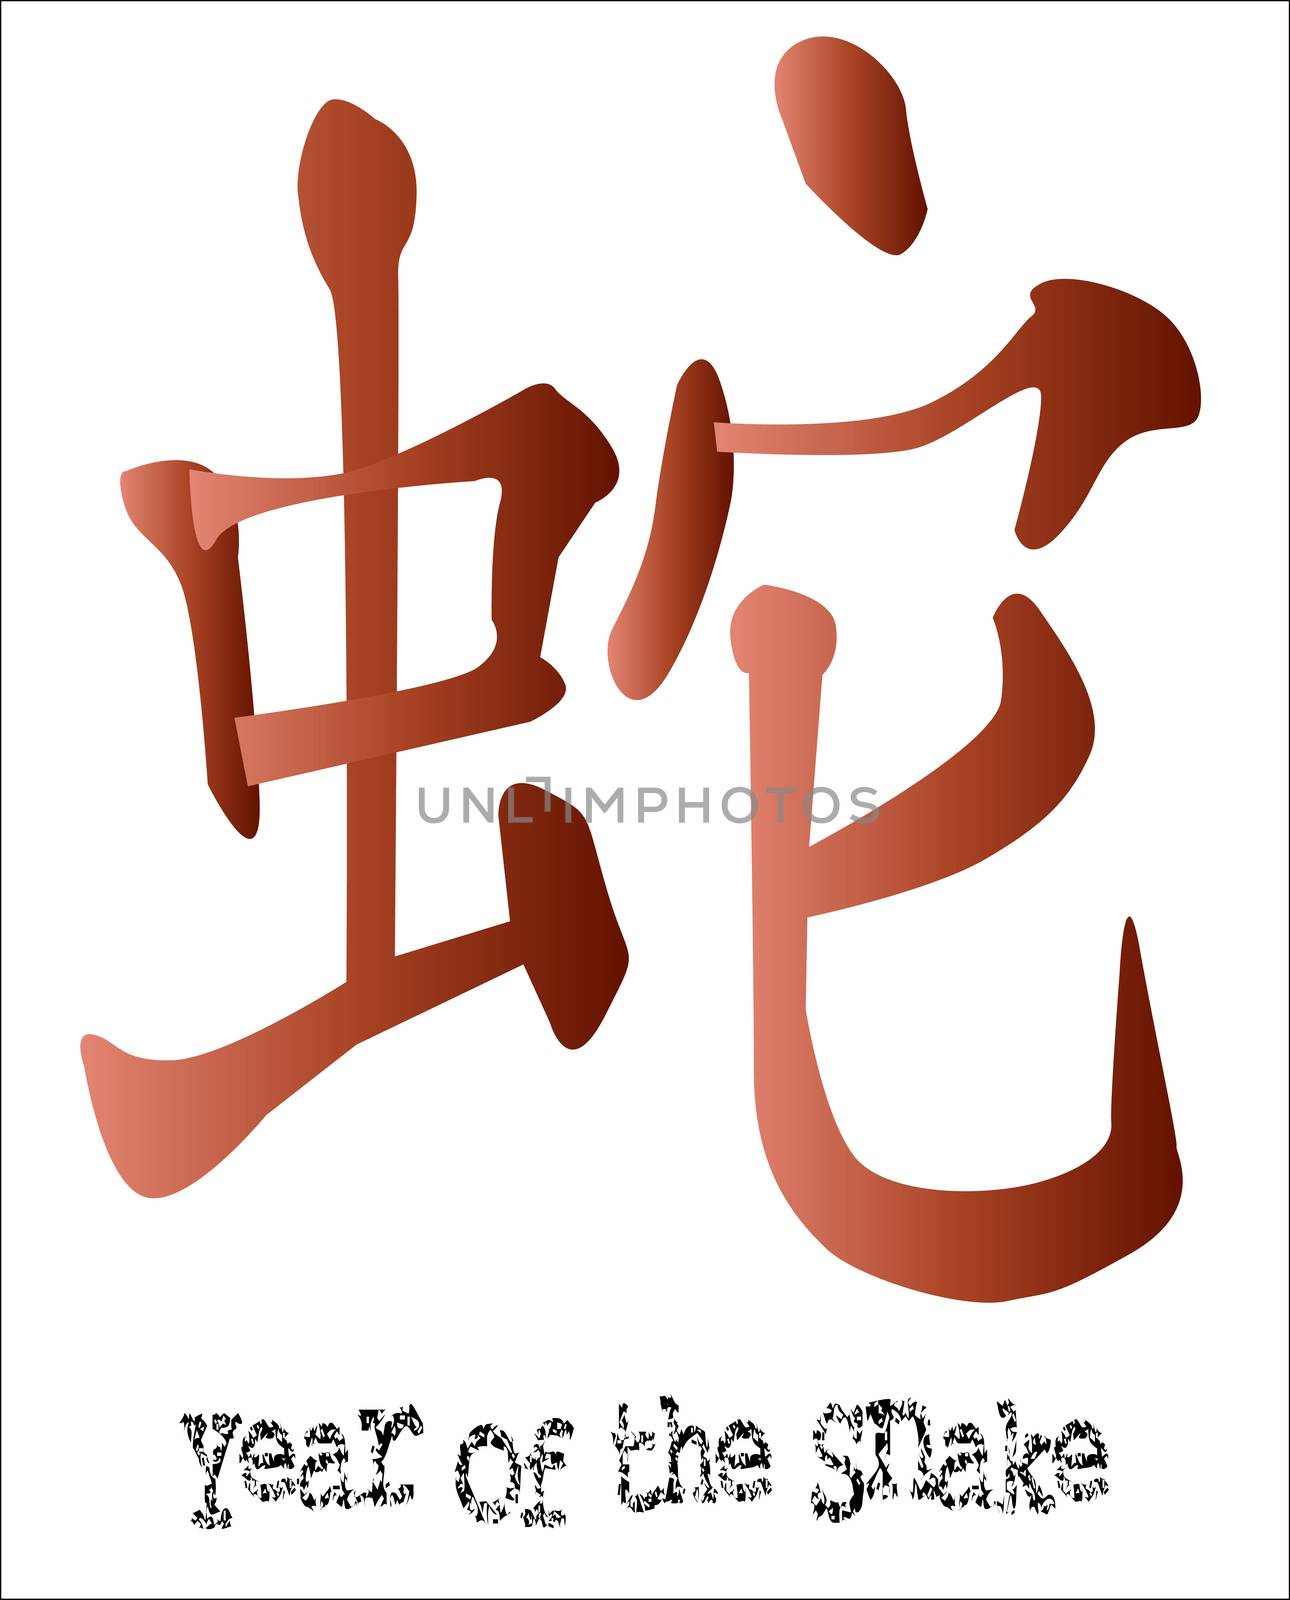 Year of the snake, one of the twelve logograms depicting the 12 Chinese animal years.